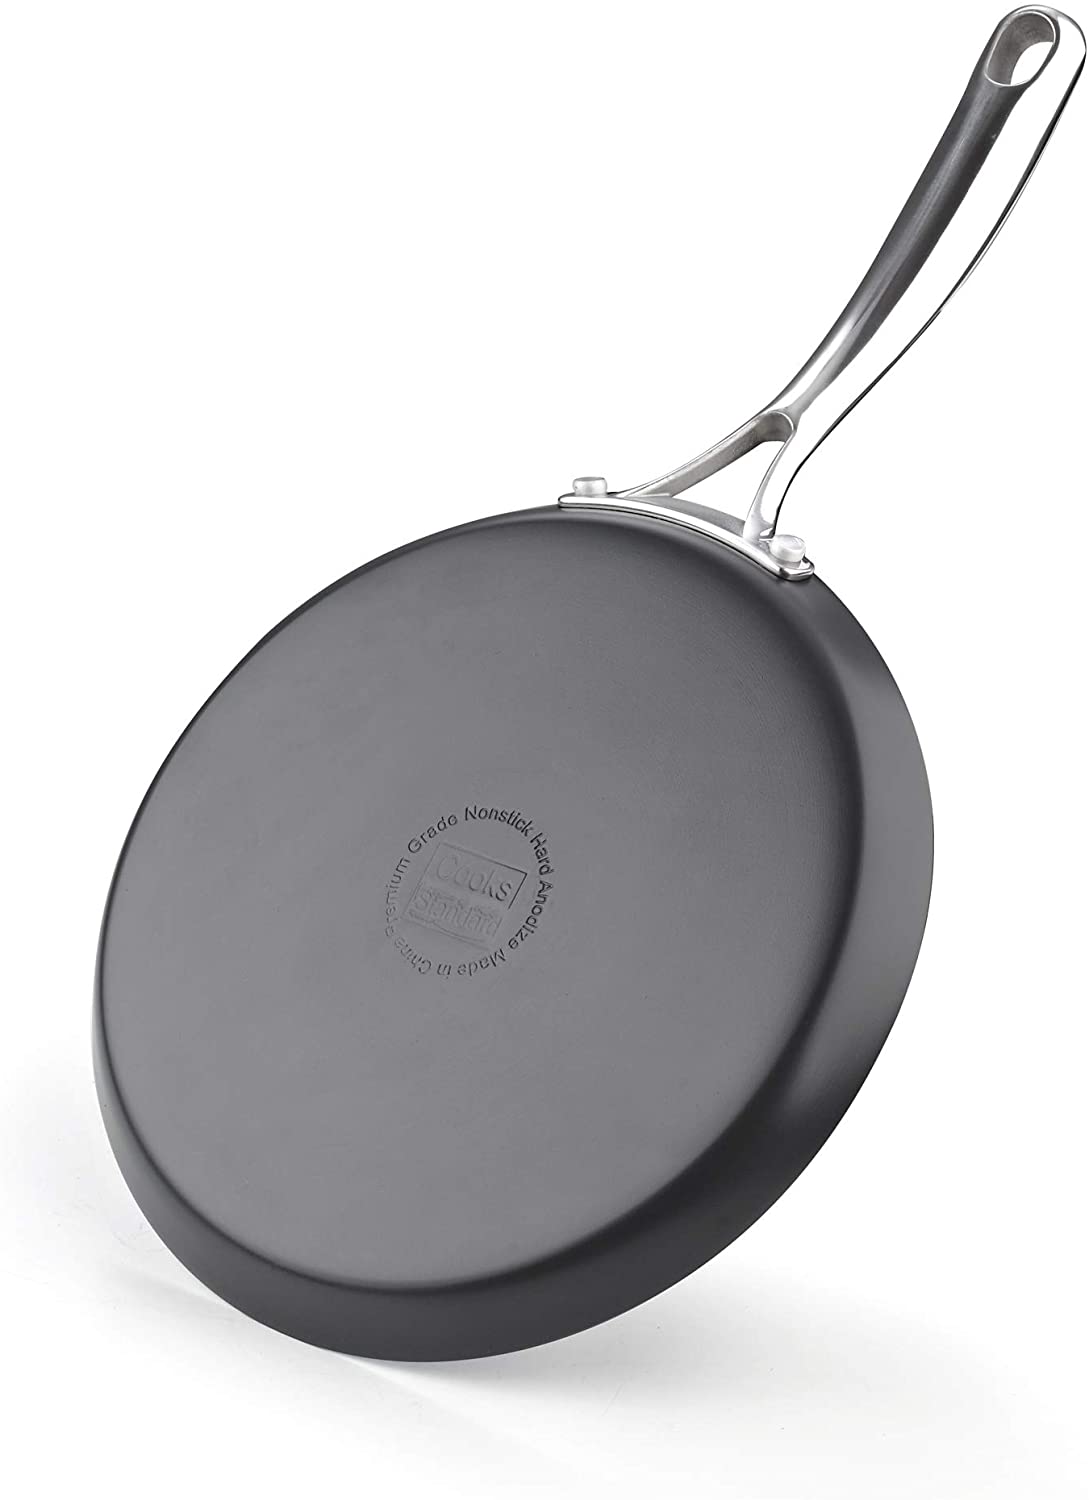 Cooks Standard Frying Omelet Pan, Classic Hard Anodized Nonstick 8